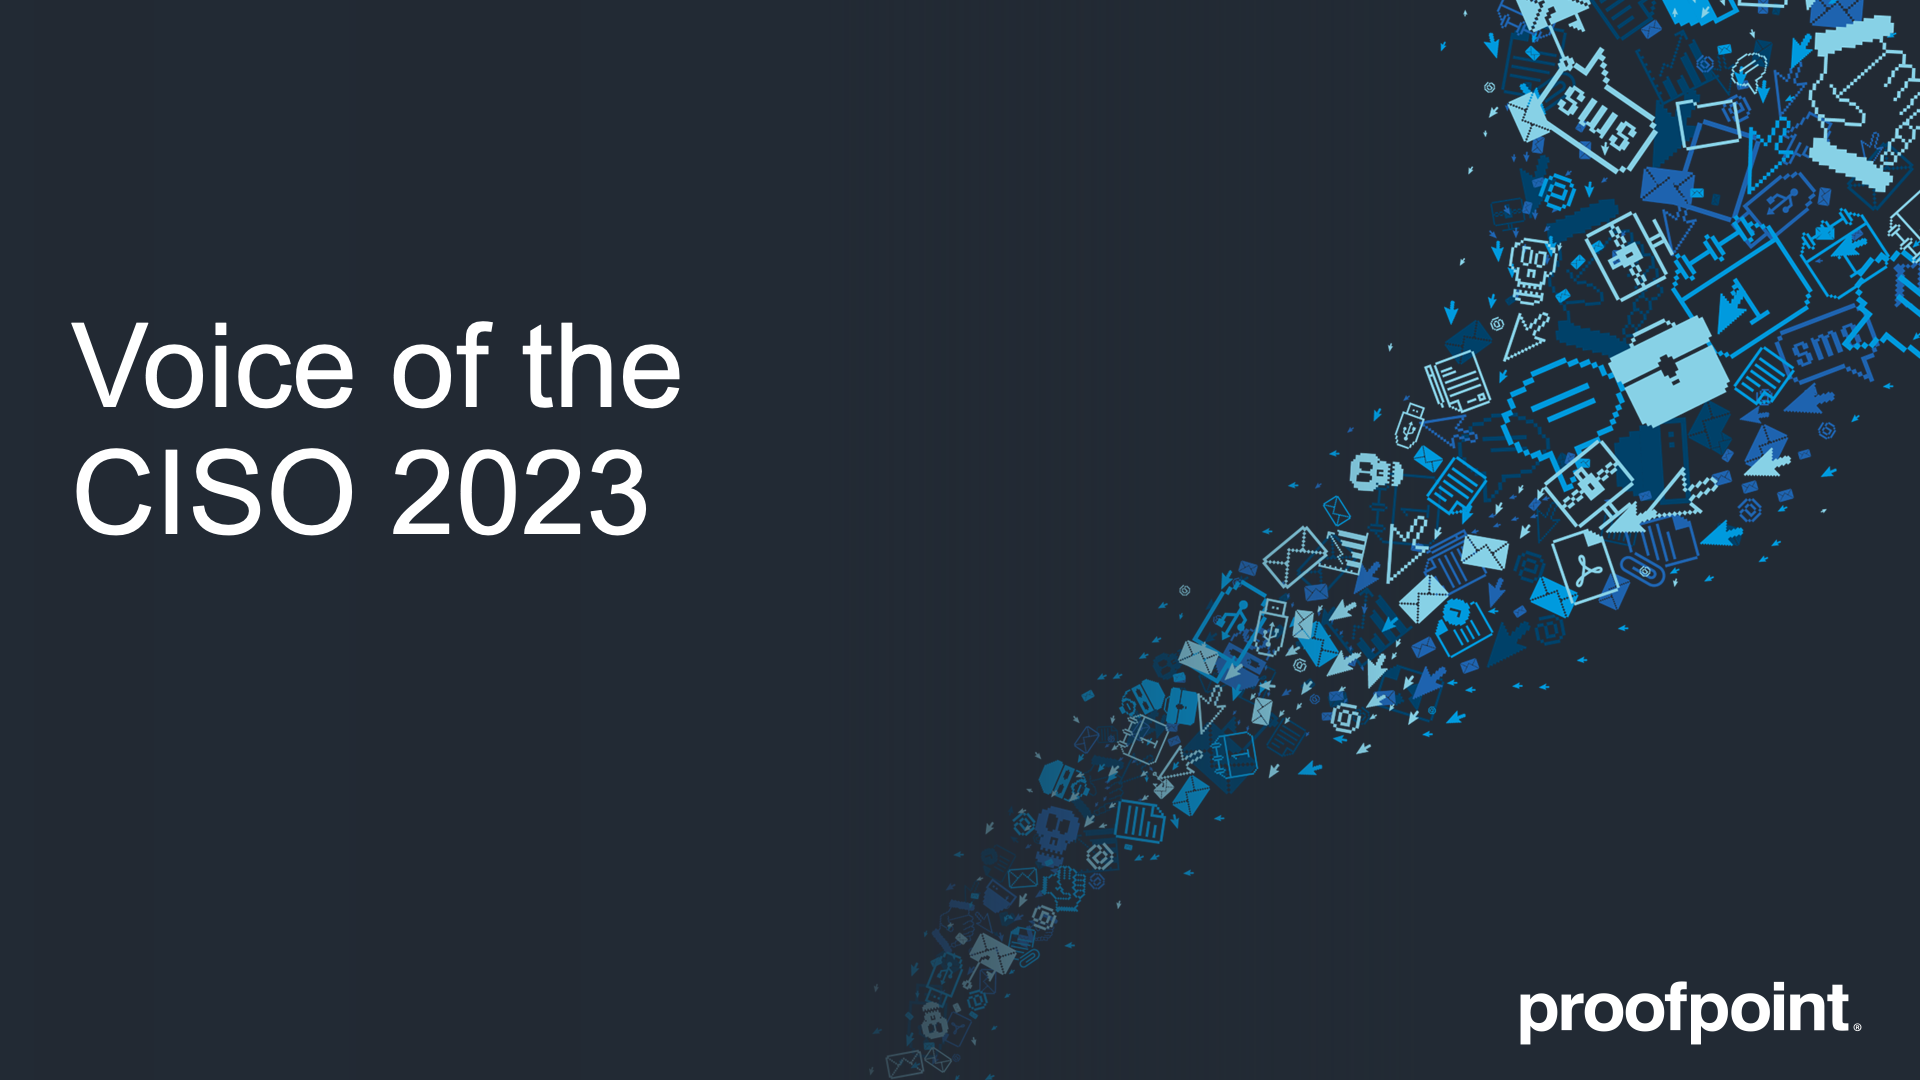 Voice of the CISO 2023